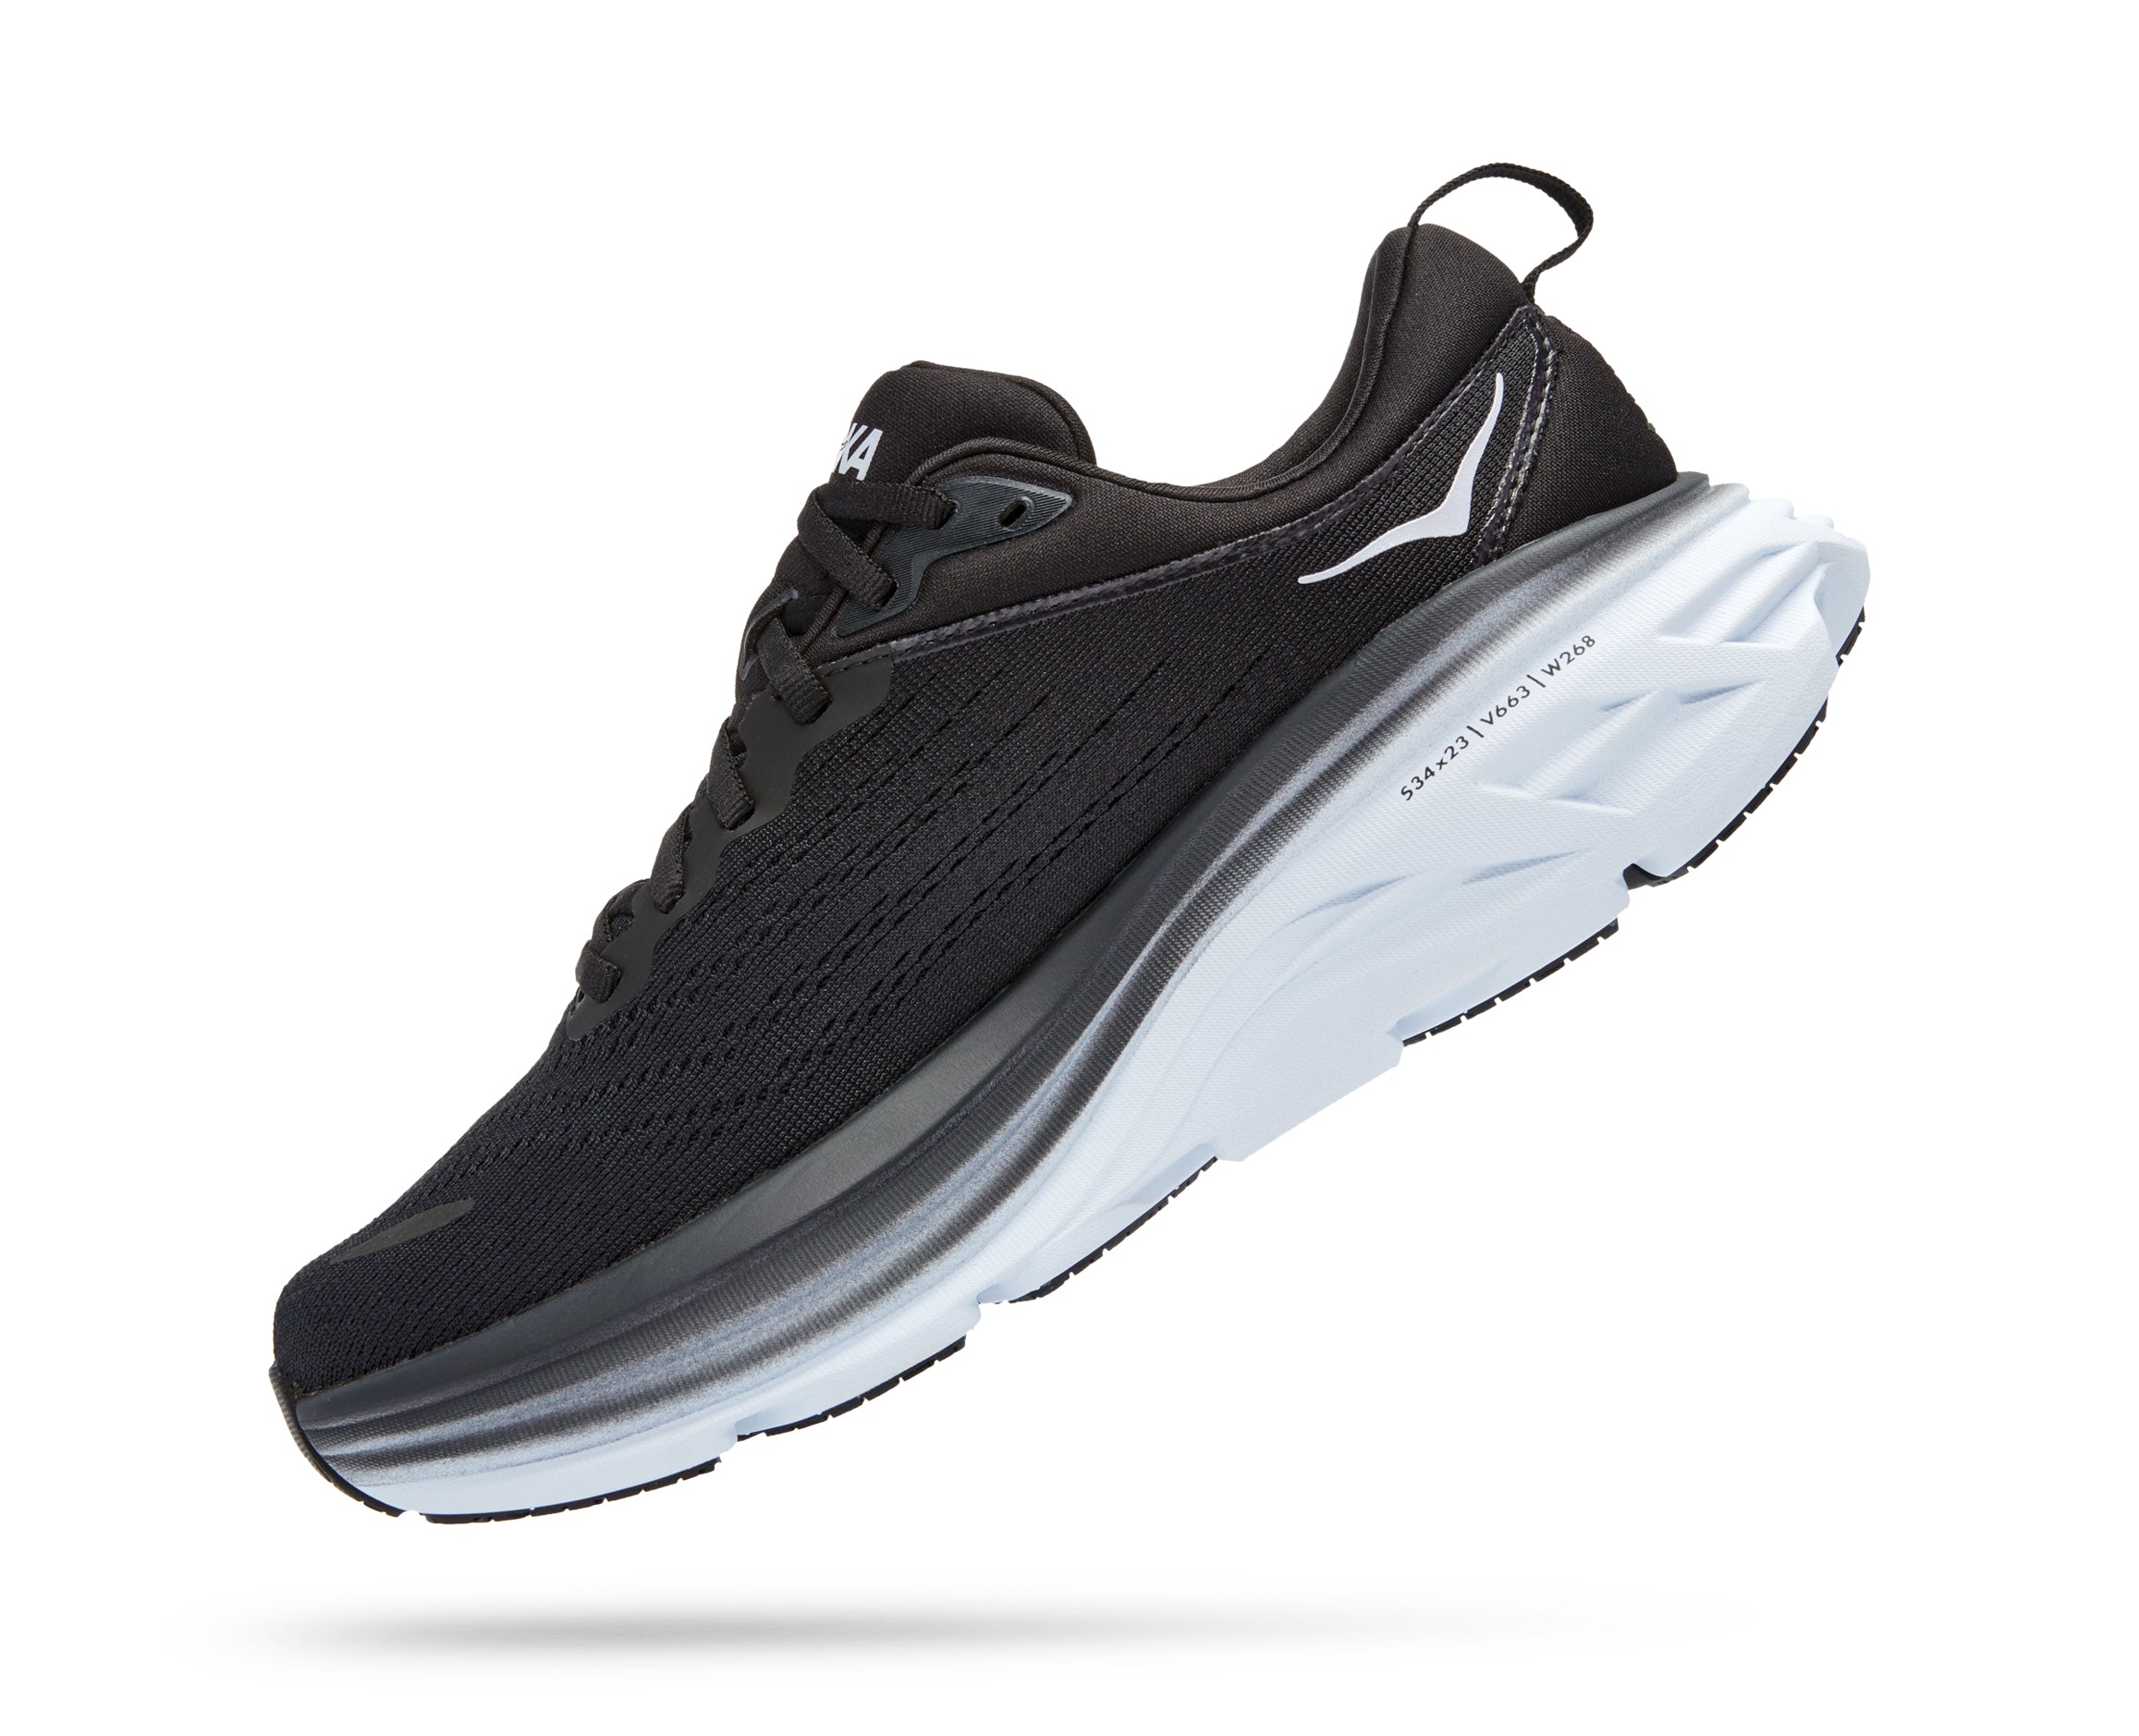 A medial side view of the women's Hoka Bondi 8 "Wide" D width in black and white.